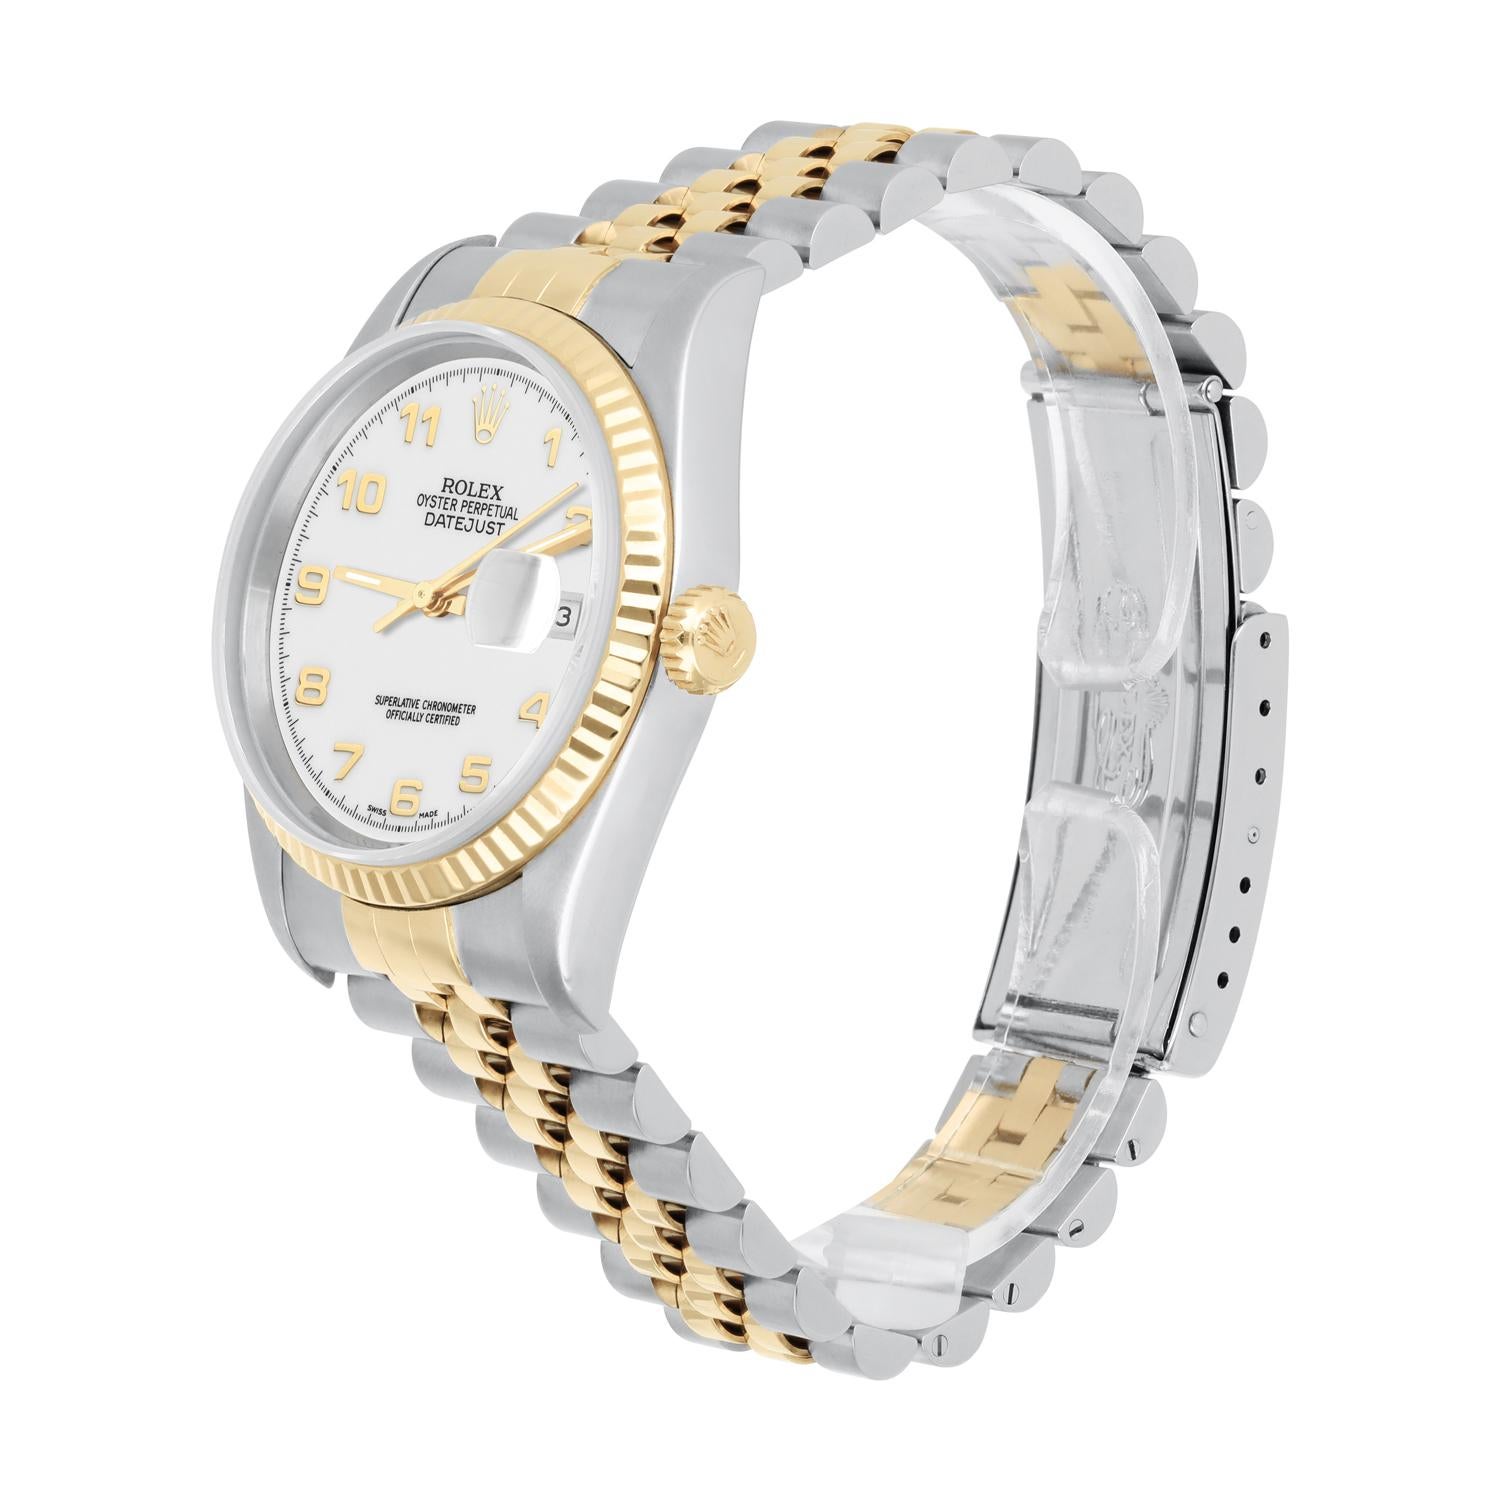 Rolex Datejust 36mm Two Tone White Arabic Dial Jubilee 16233 Circa 2000 In Excellent Condition For Sale In New York, NY